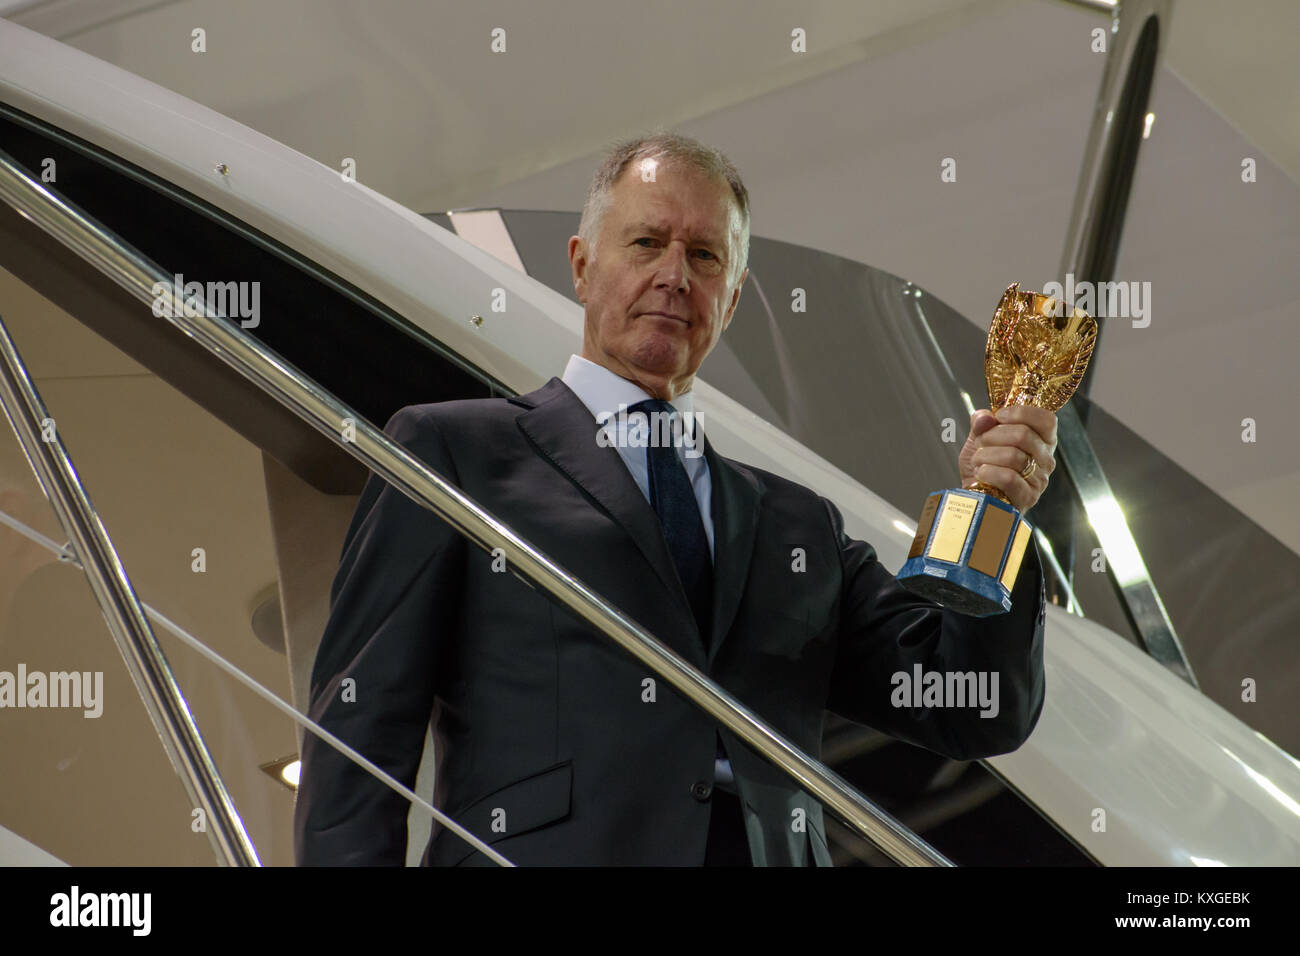 ExCel, London, Regno Unito. Il 10 gennaio, 2018. Sir Geoff Hurst a Sunseeker stand presso il London Boat Show, clucthing Jules Rimet World Cup Trofeo. Credito: Neil Doyle/Alamy Live News. Foto Stock